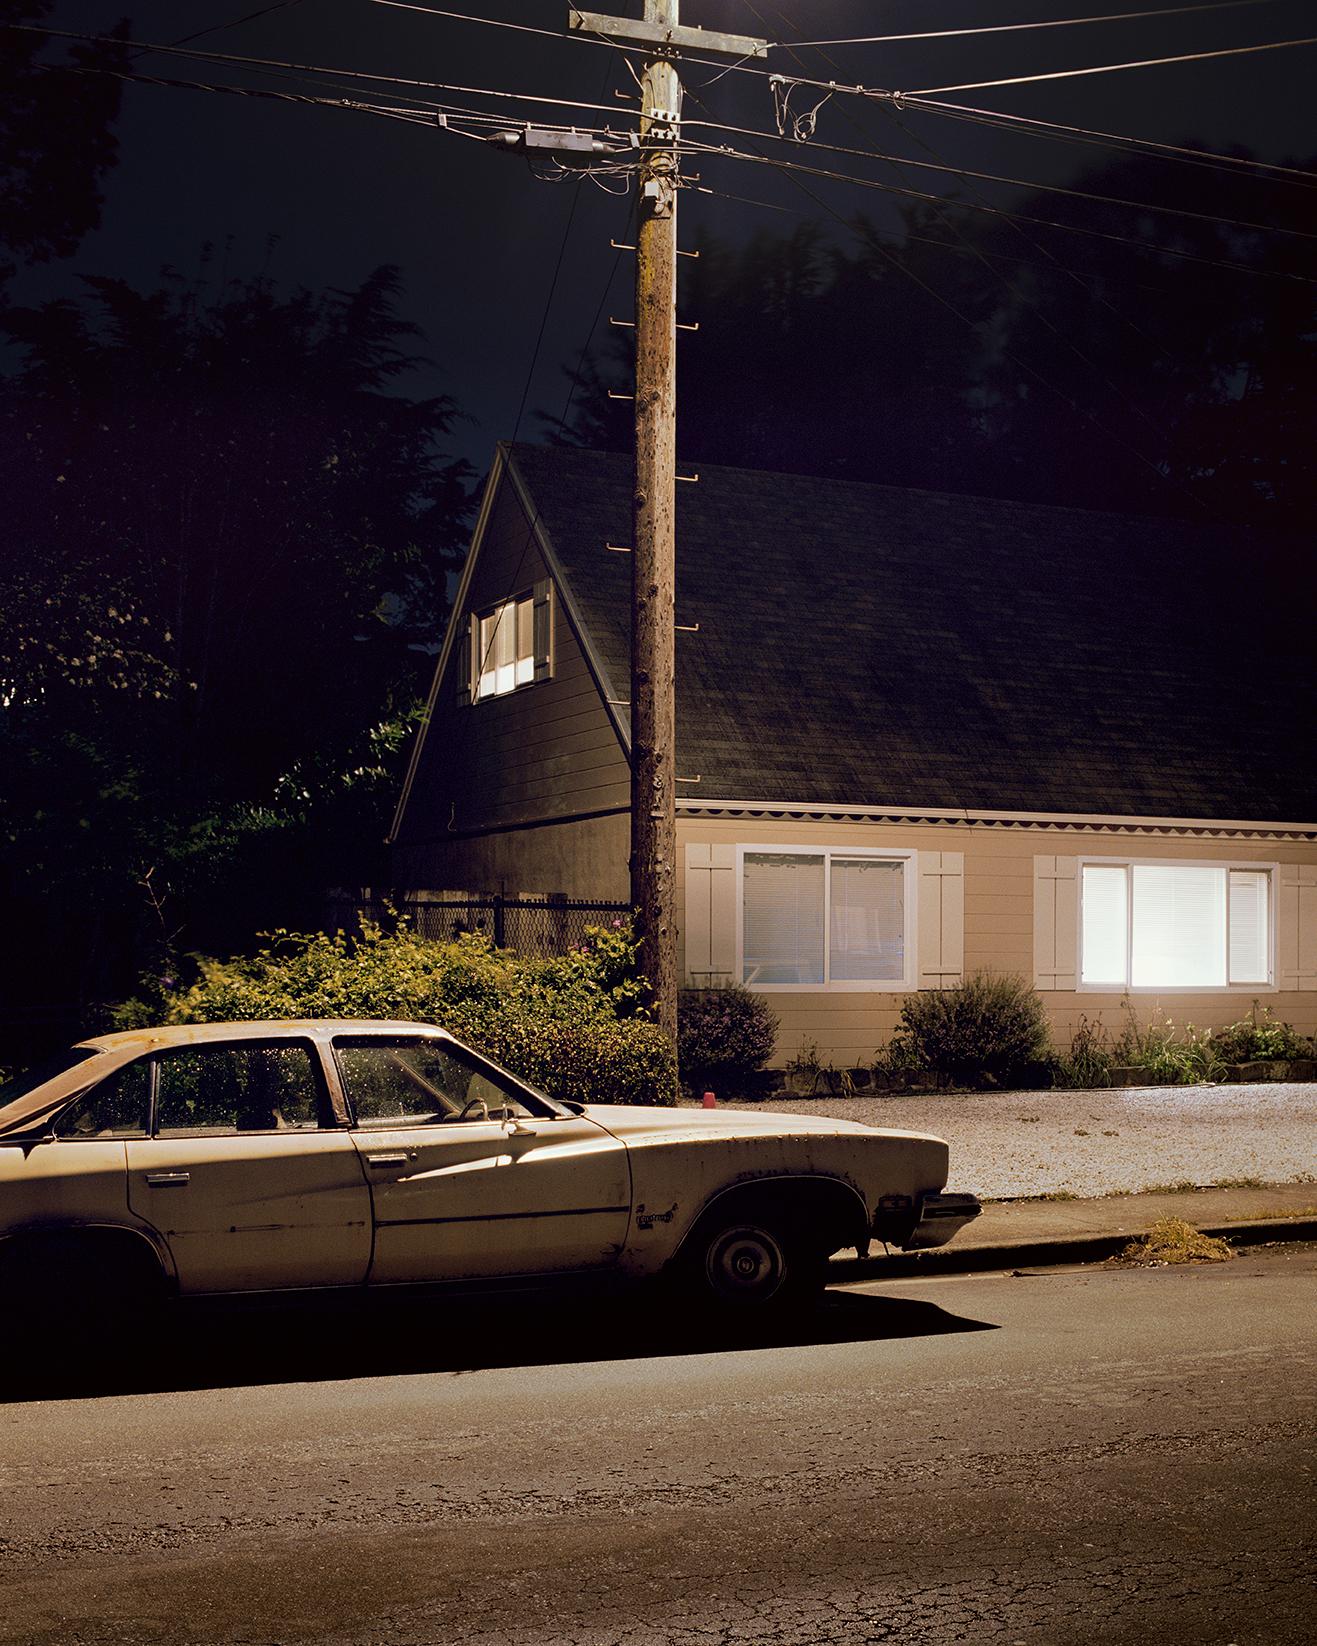 Signed, titled and dated on reverse
Archival pigment print

Available in three sizes:
24 x 20 inches, from an edition of 10 + 3 APs
38 x 30 inches, from an edition of 5 + 2 APs
48 x 38 inches, from an edition of 3 + 2 APs

Todd Hido (born 1968) is